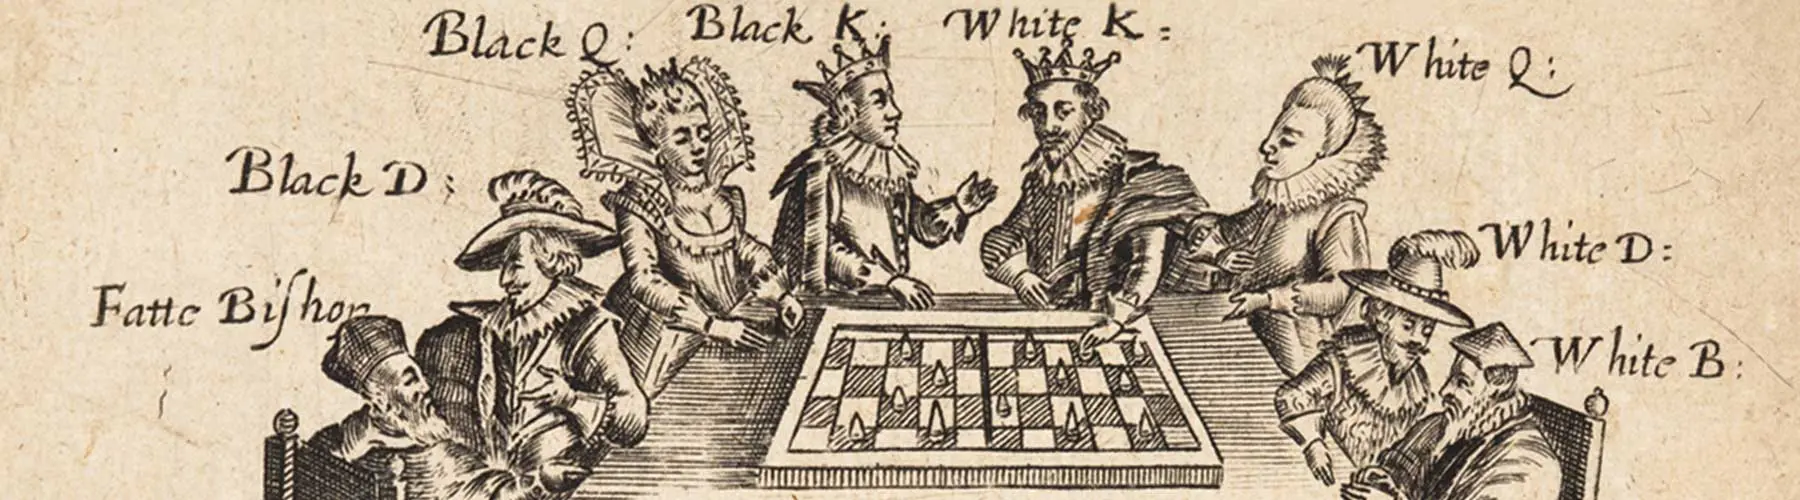 1625 illustration of people playing chess